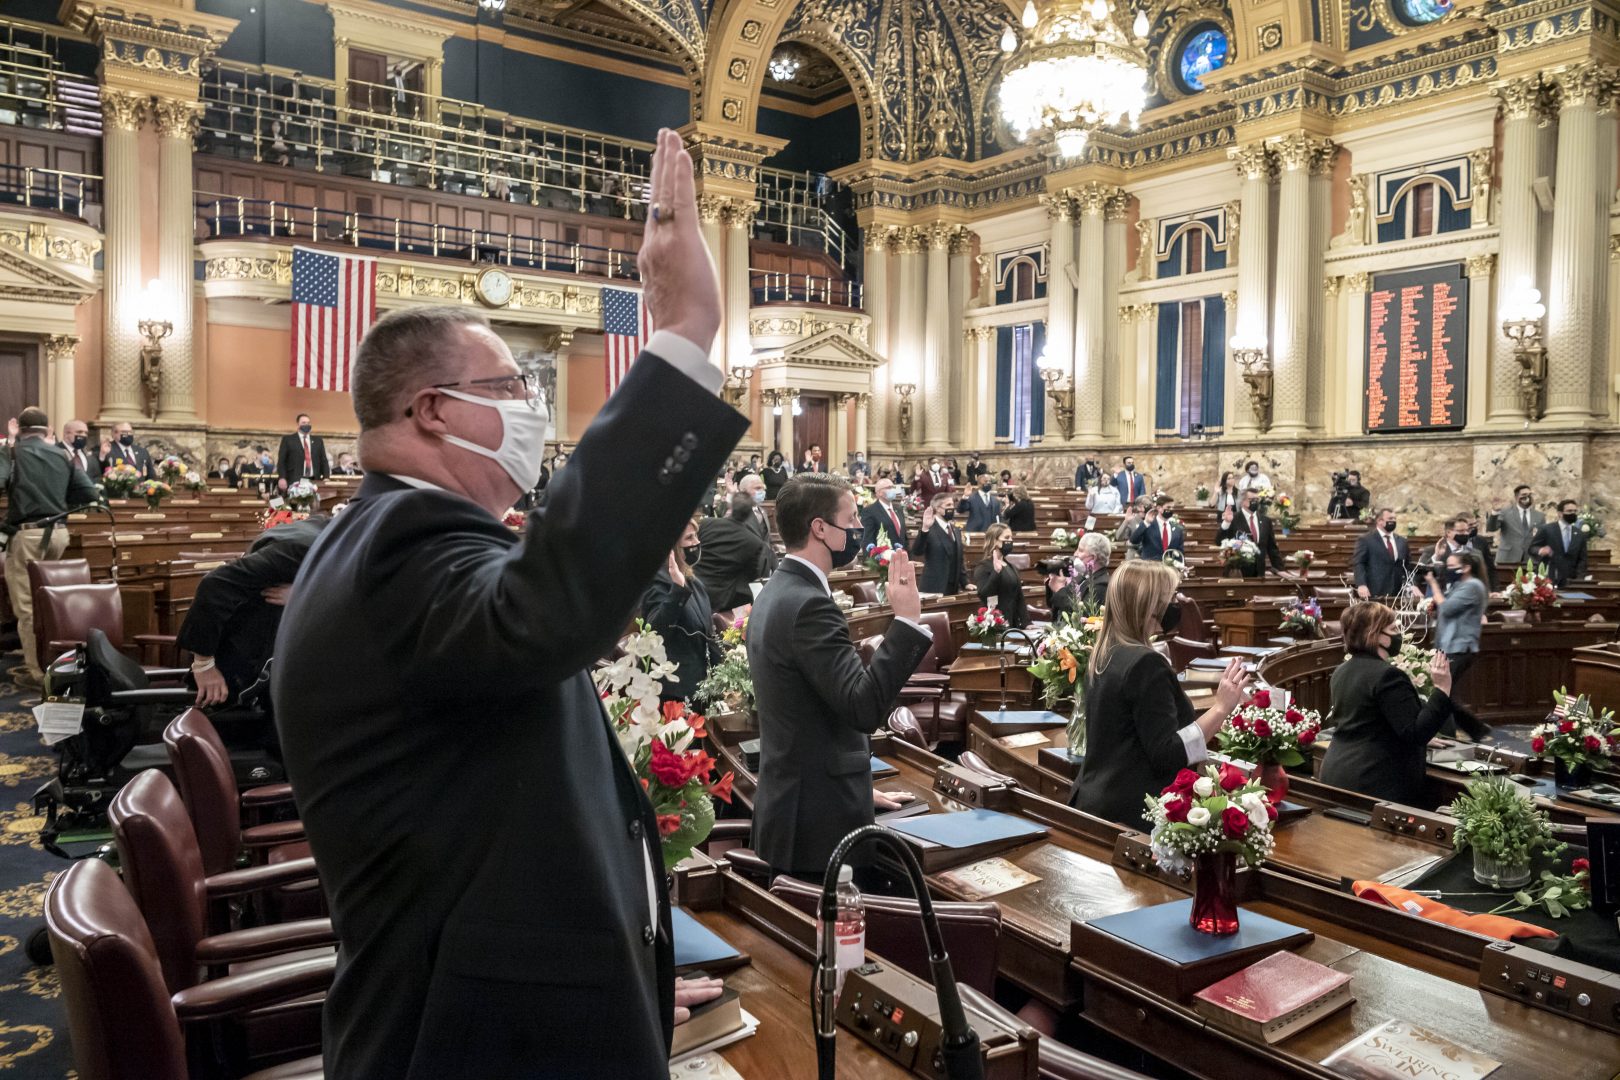 First term legislators of the Pennsylvania House of Representatives are sworn-in, Tuesday, Jan. 5, 2021, at the state Capitol in Harrisburg, Pa. The ceremony marks the convening of the 2021-2022 legislative session of the General Assembly of Pennsylvania.